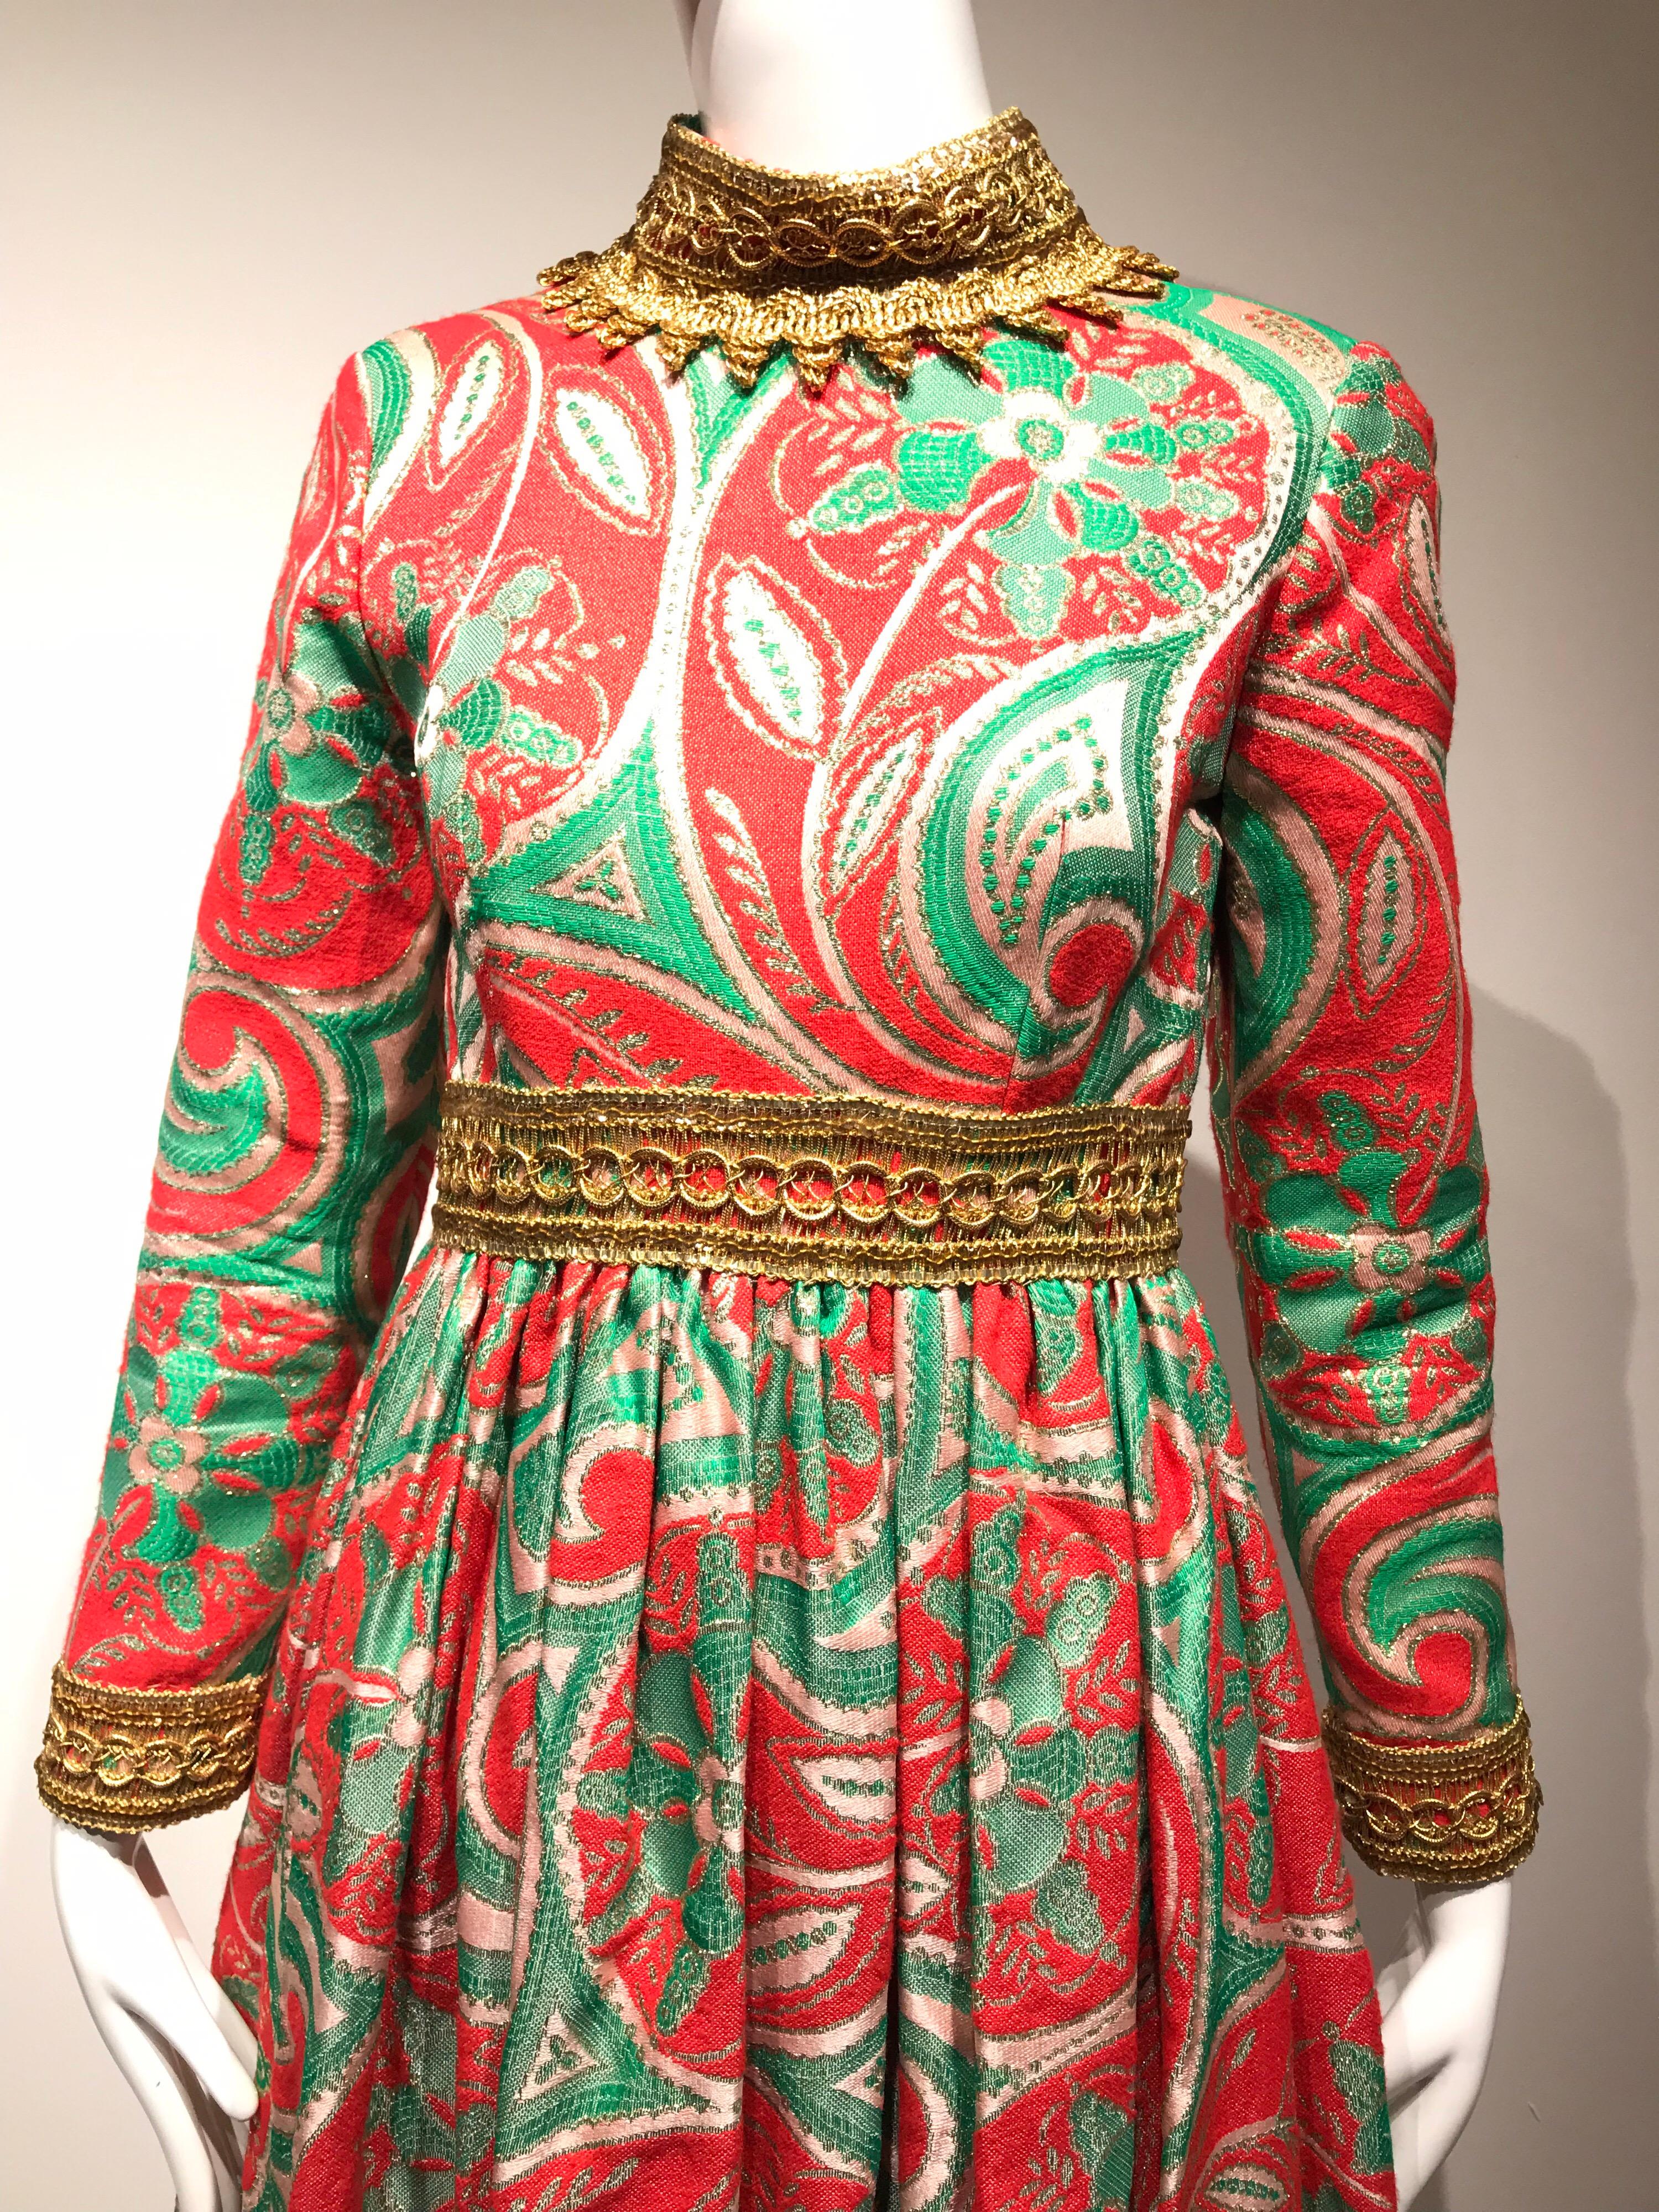 Late 60s Fun Holiday theme Oscar De La renta red, green and metallic gold silk brocade long sleeve dress. Perfect for Christmas Eve!  
Size: Small ( 2/4)
Bust; 34 inches/ Rib cage: 30 / Waist: 27”
Dress length:  51.5. And there is additional 4”